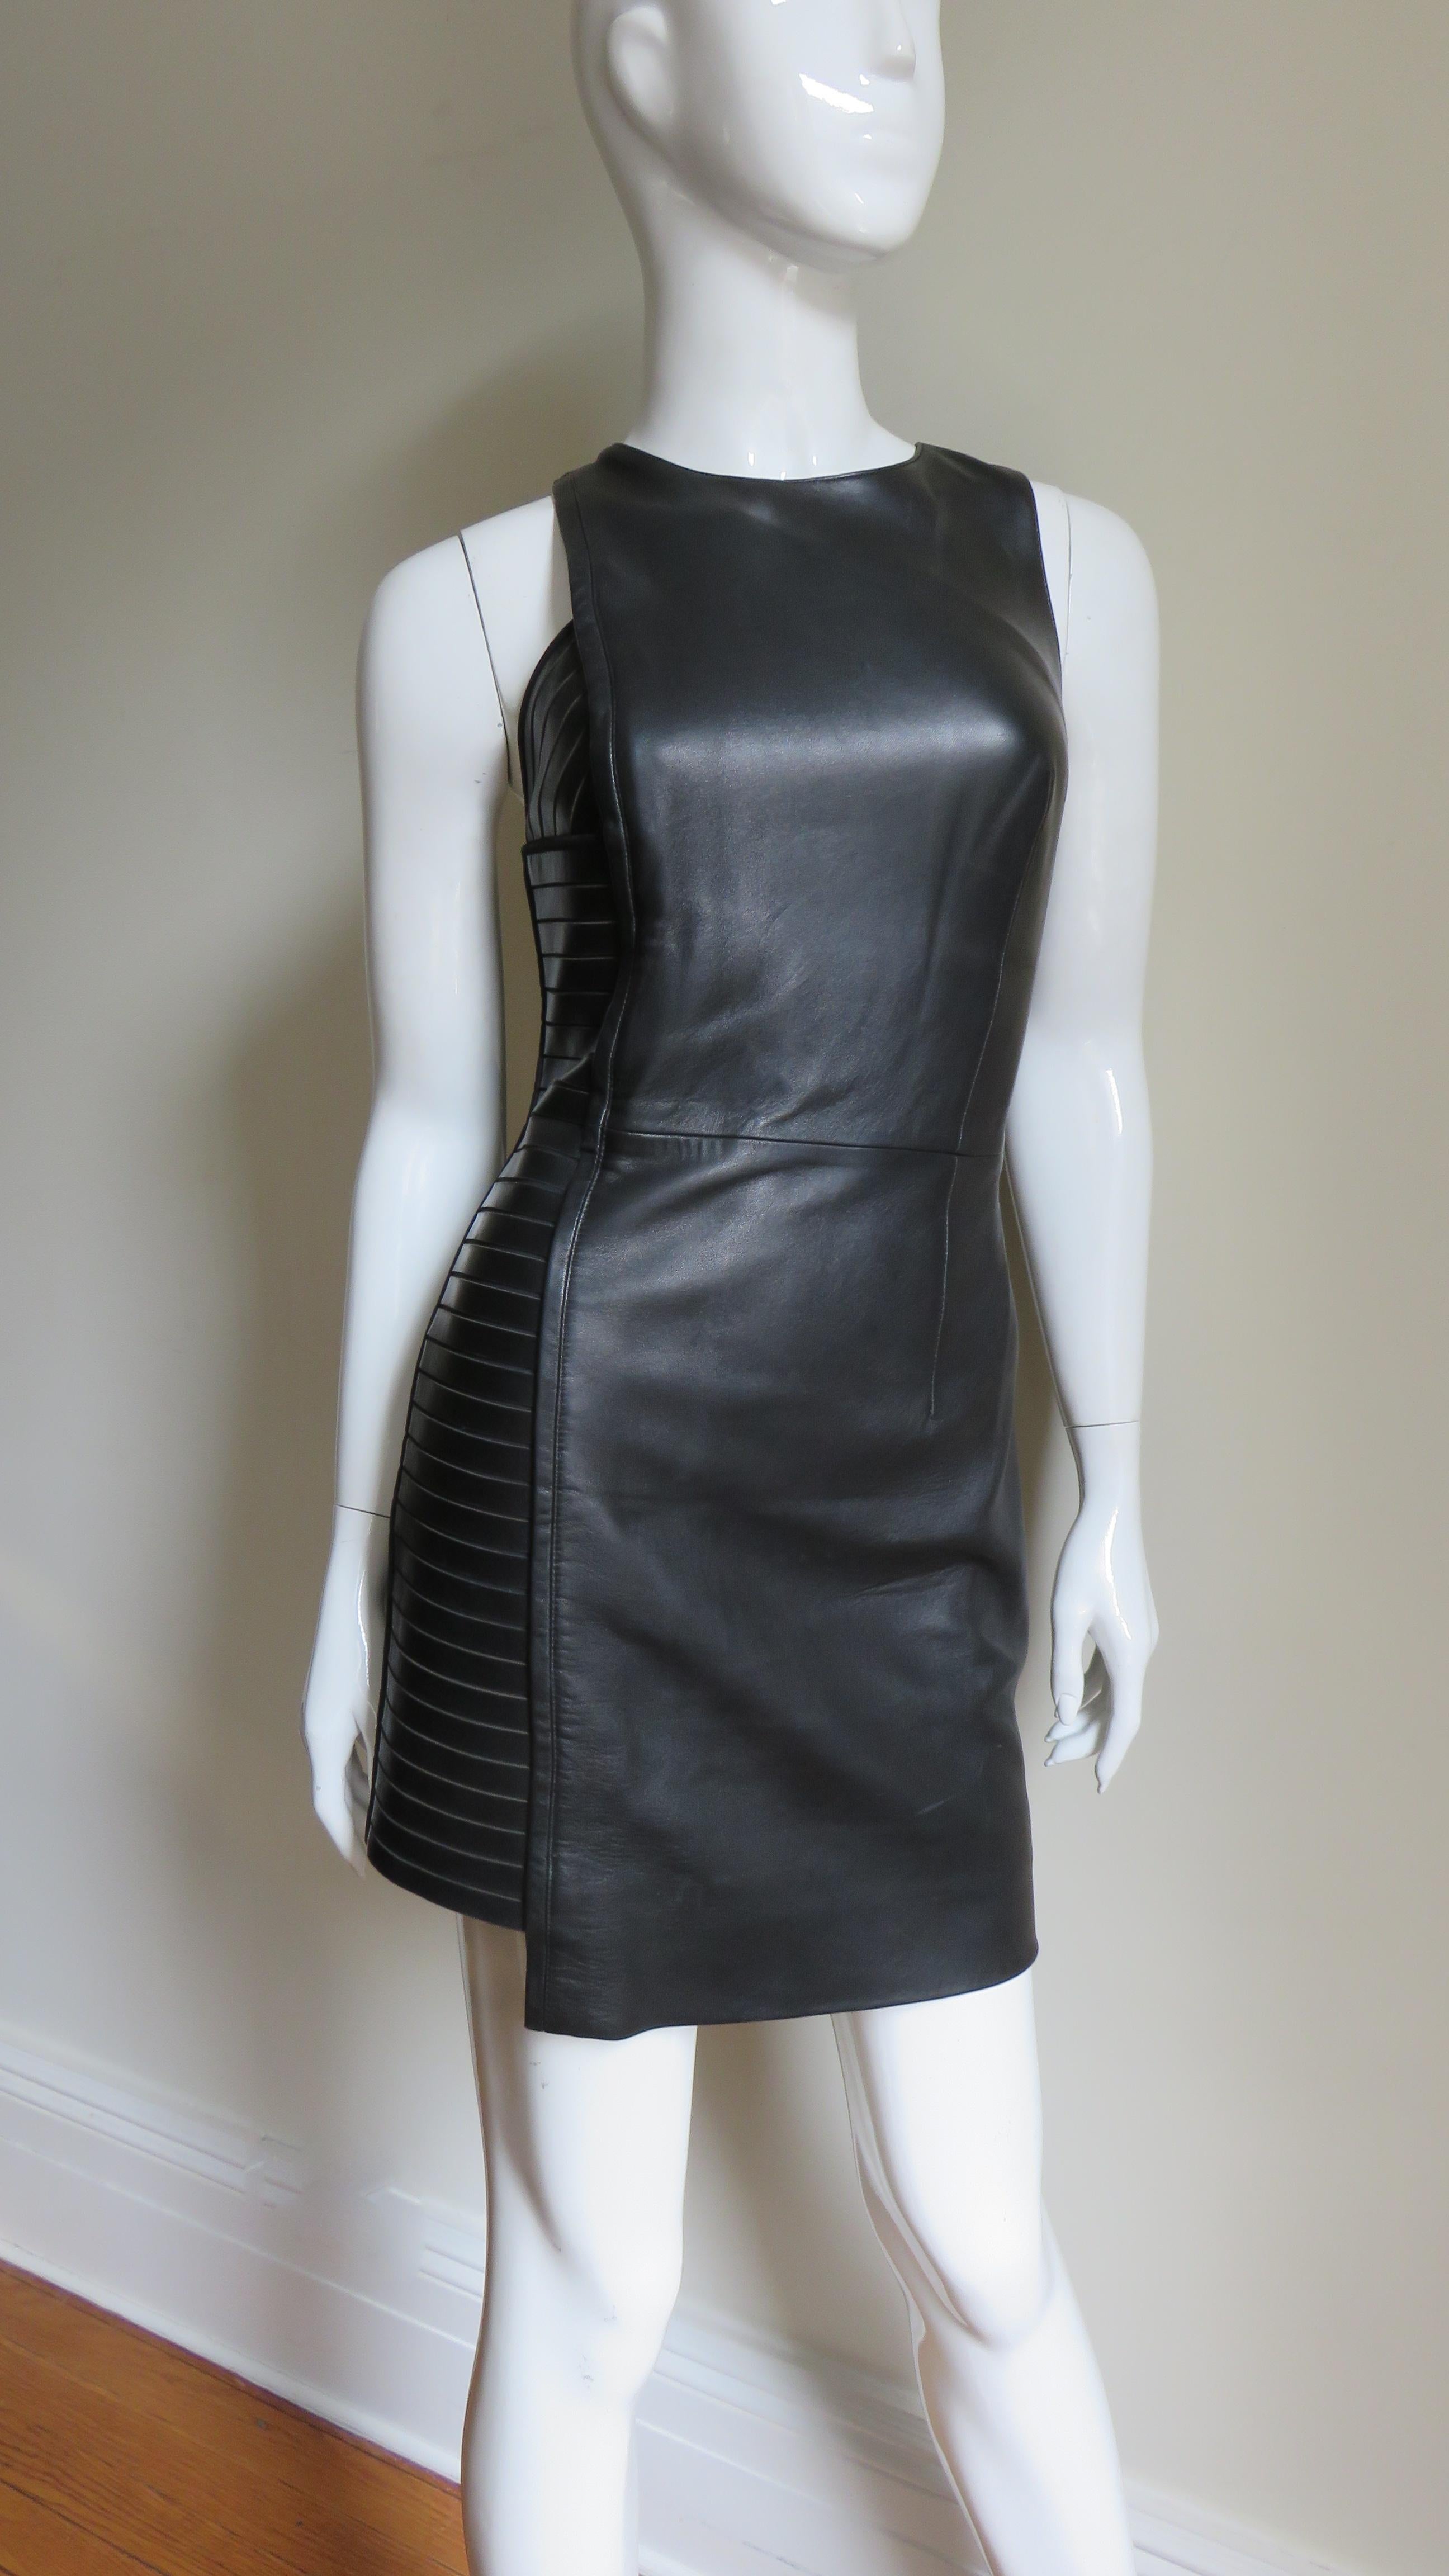 A fabulous black leather dress from Versace. It is sleeveless, semi fitted with a side panel of horizontal leather bands. The dress is fully lined with an invisible side zipper and hooks at one shoulder.
Fits size Extra Small, Small.  Marked size 40